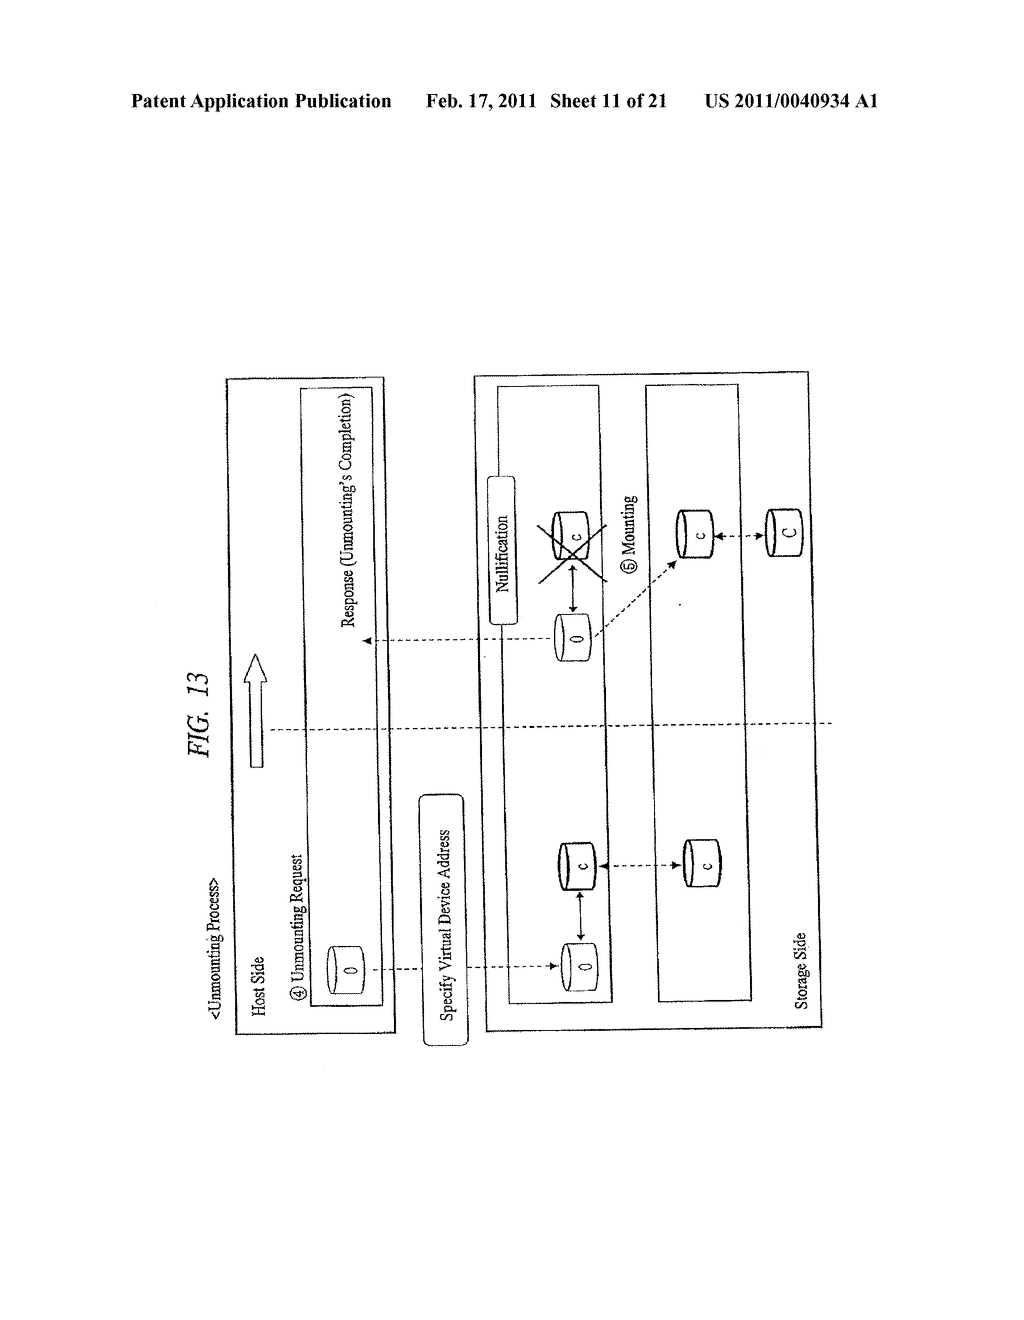 STORAGE APPARATUS HAVING VIRTUAL-TO-ACTUAL DEVICE ADDRESSING SCHEME - diagram, schematic, and image 12